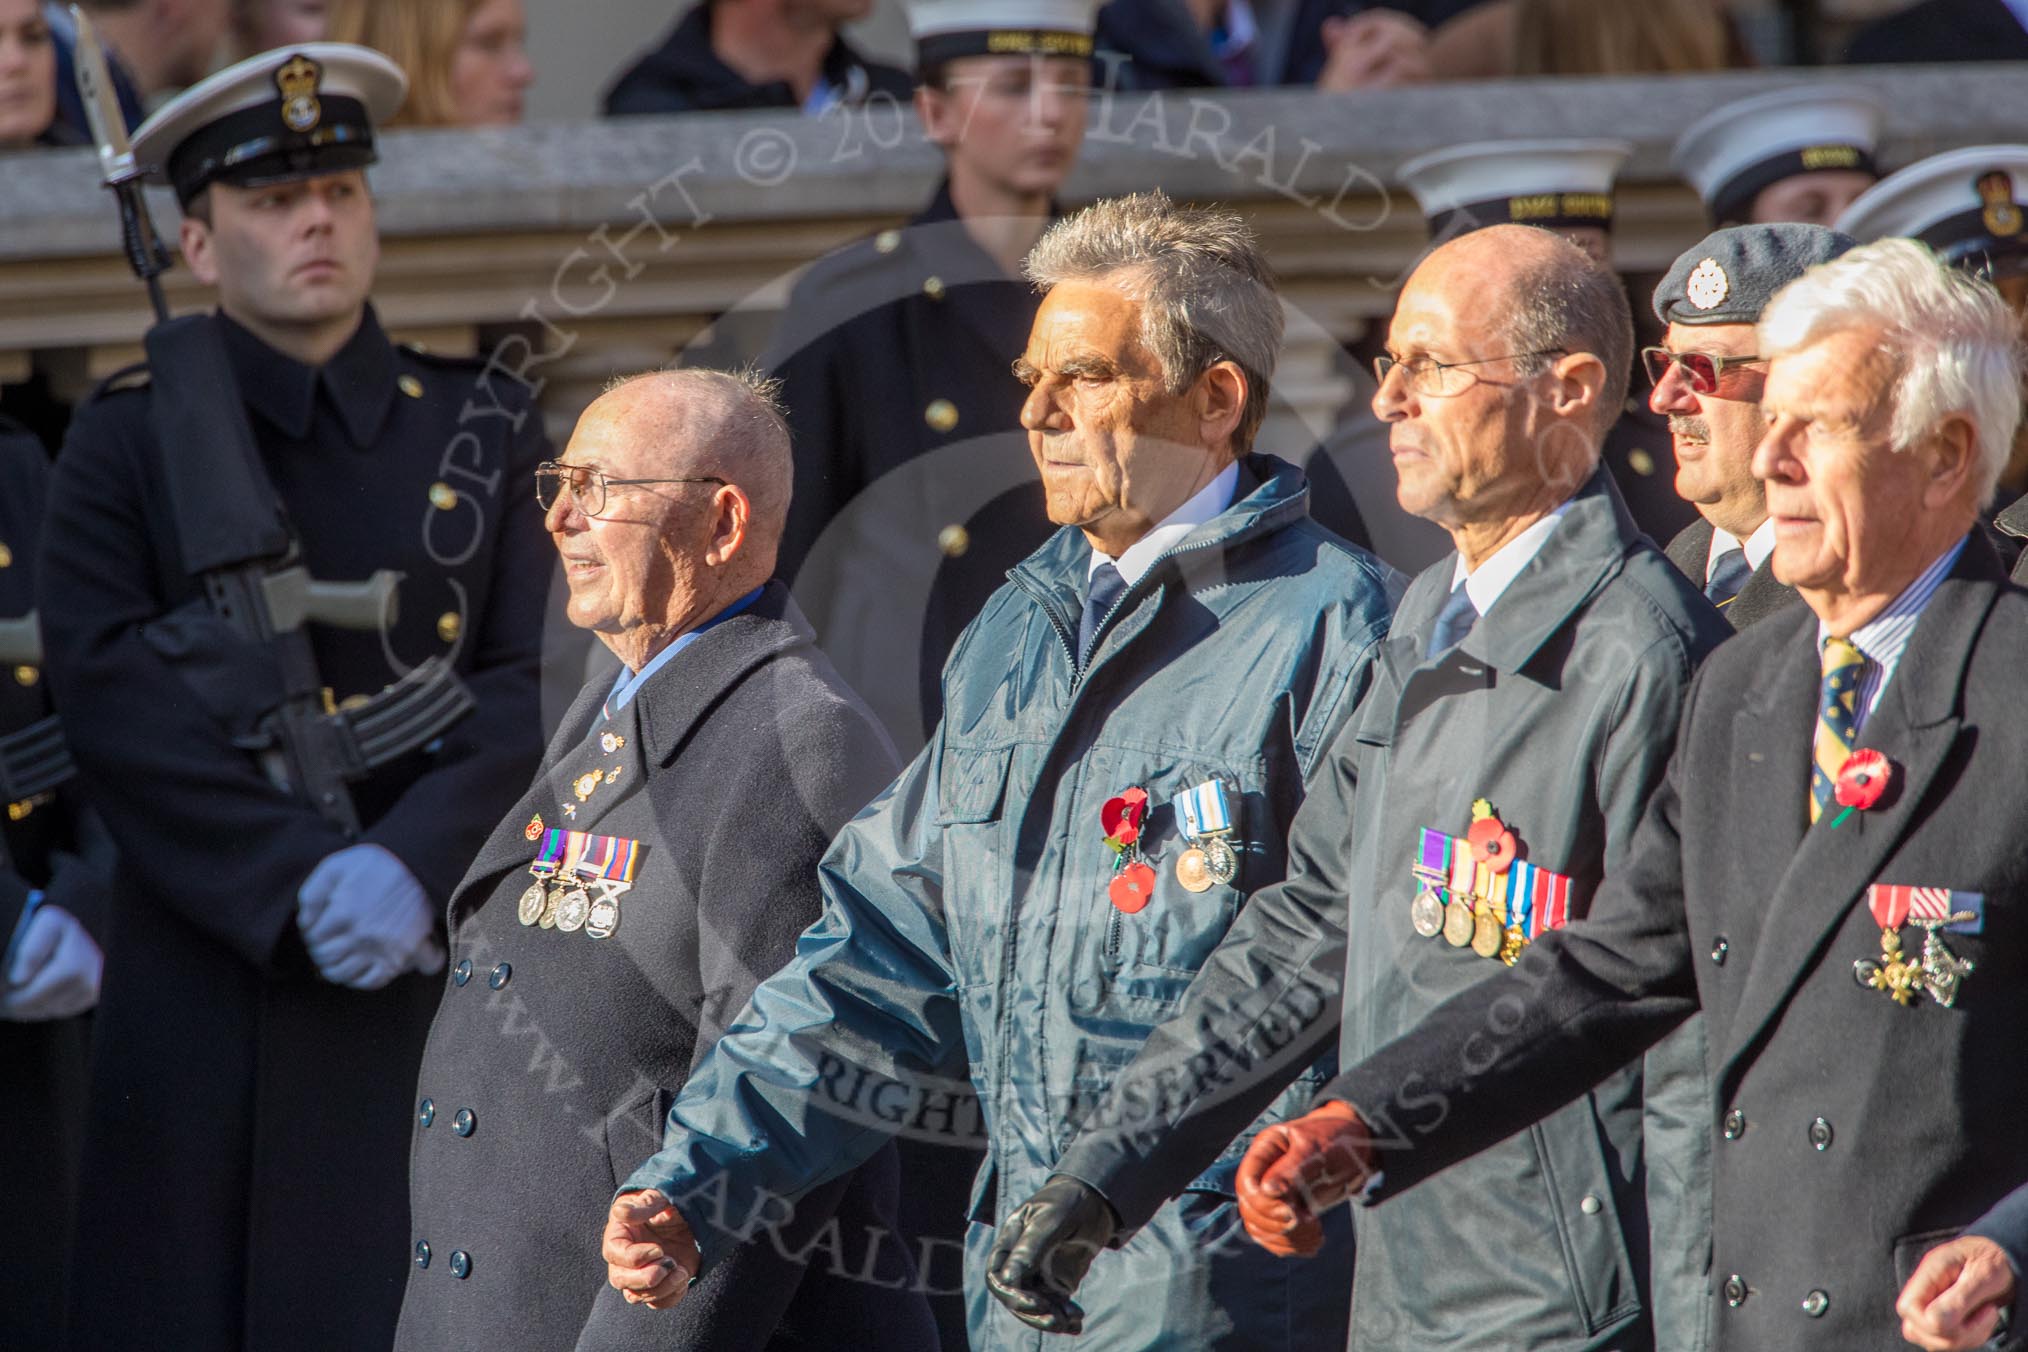 84 Squadron Association (Group C29, 15 members) during the Royal British Legion March Past on Remembrance Sunday at the Cenotaph, Whitehall, Westminster, London, 11 November 2018, 12:19.